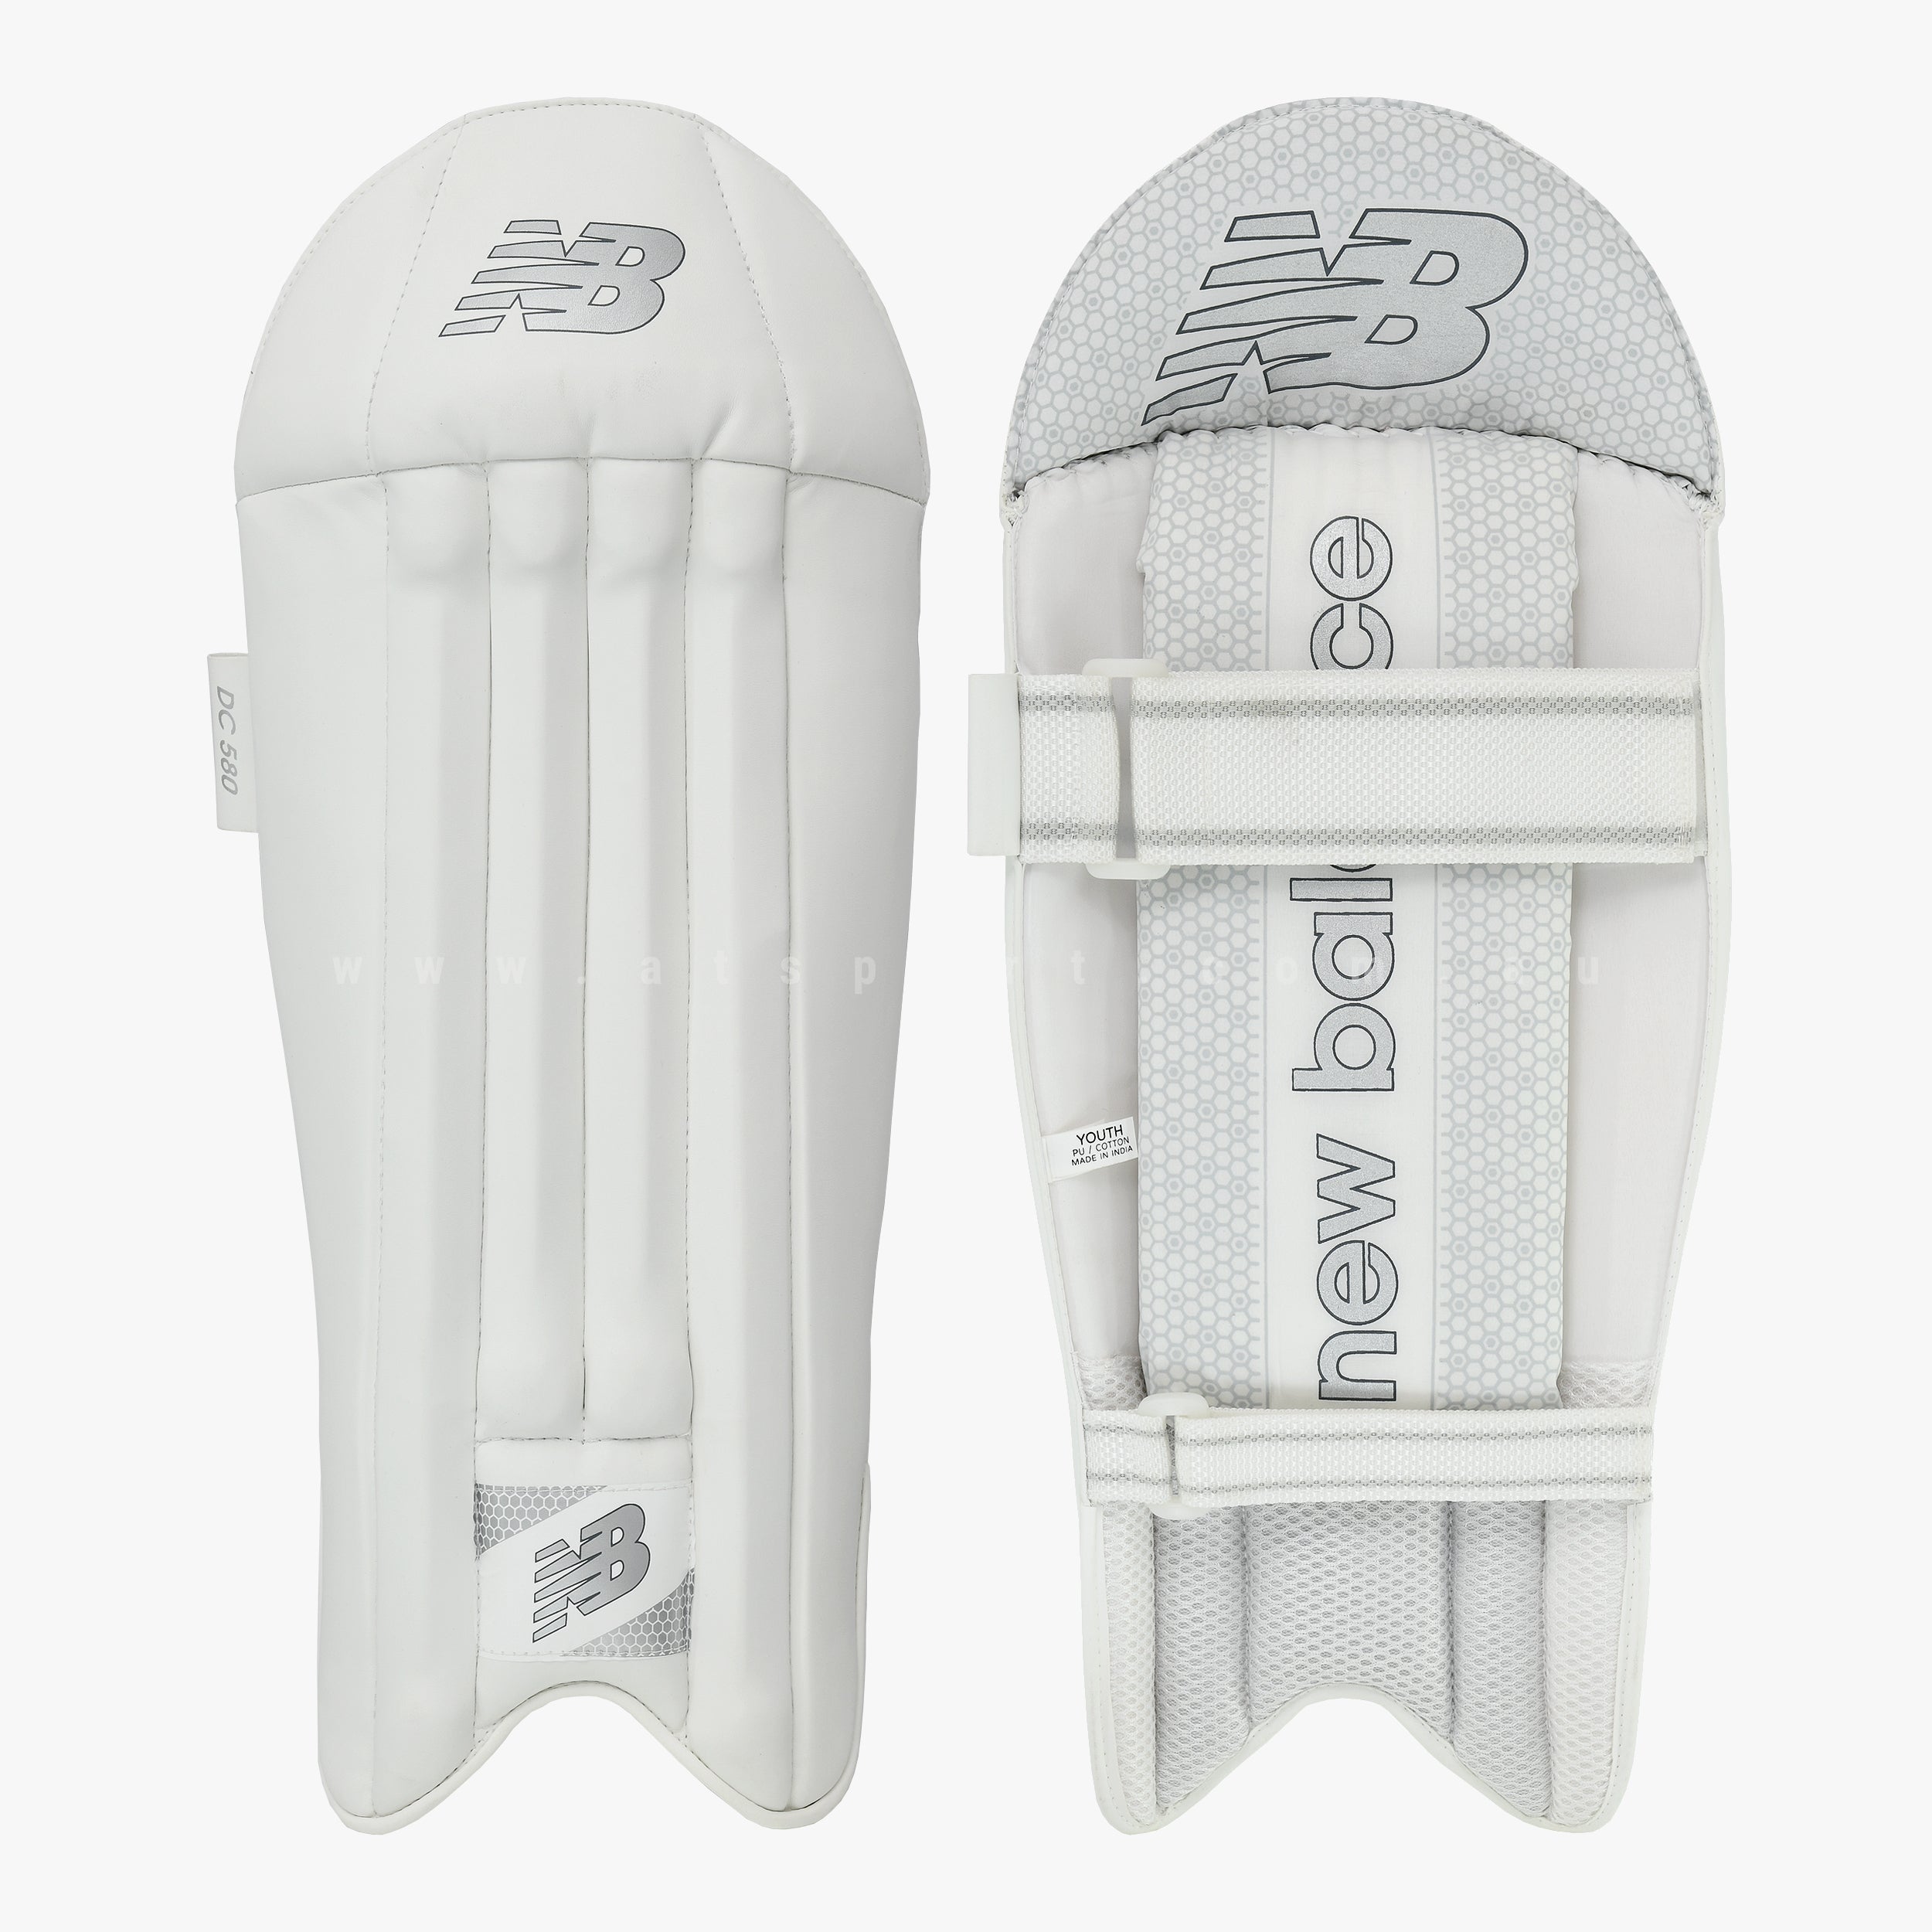 New Balance DC 580 Wicket Keeping Pads - YOUTH